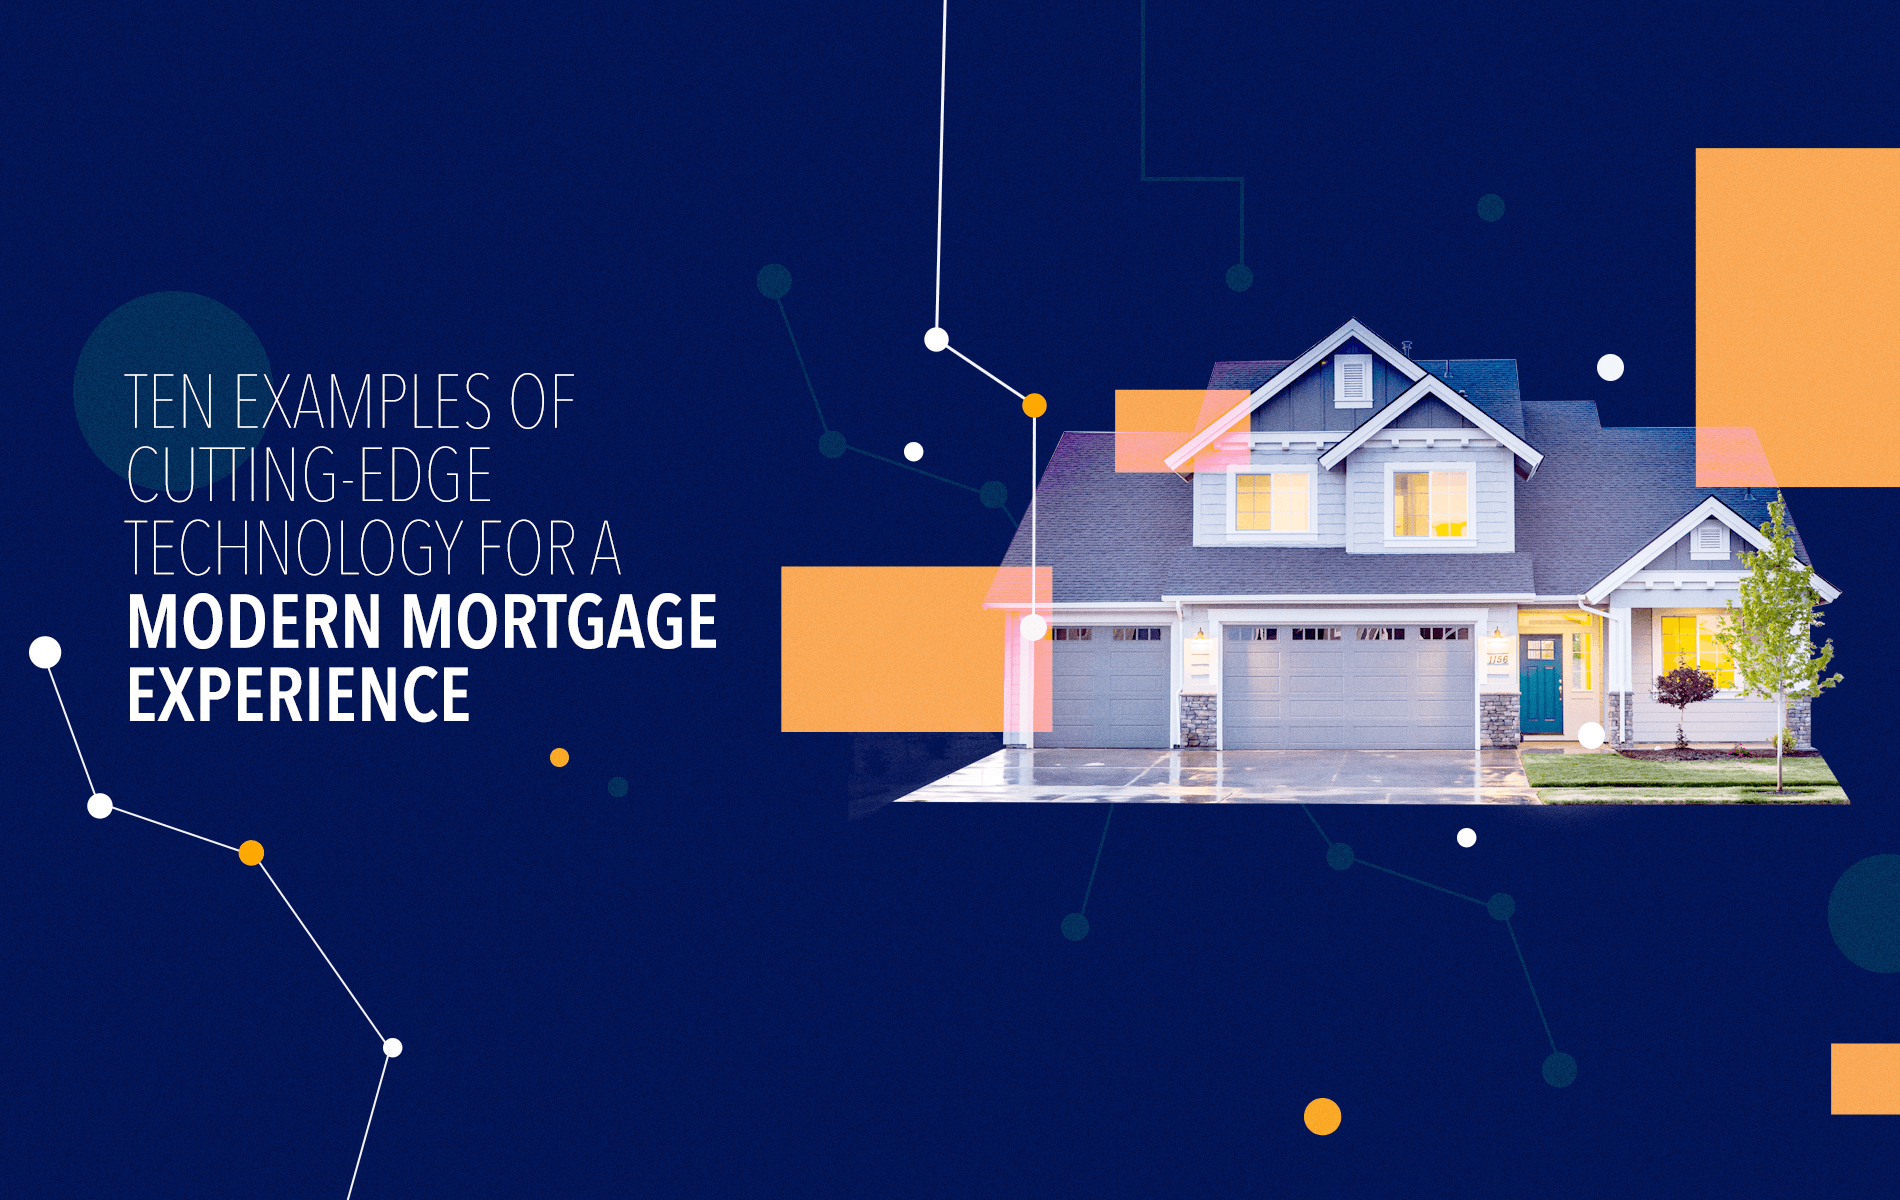 Ten Examples of Cutting-Edge Technology for a Modern Mortgage Experience